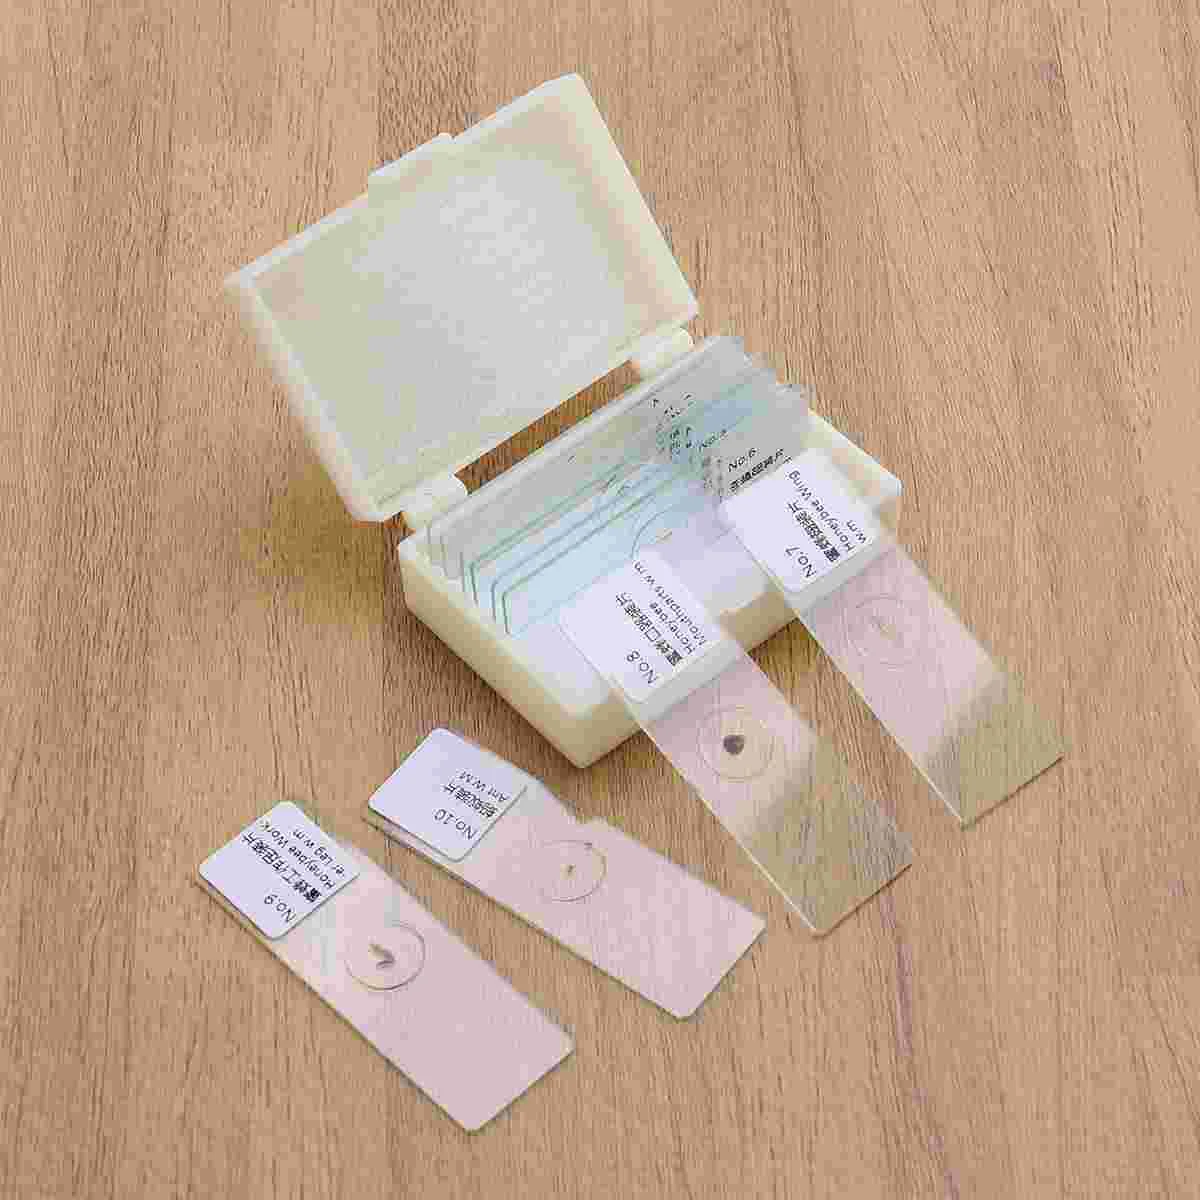 

10 PCS/Set Biology Sample Specimens Microscope Prepared Specimens Slides of Insects Plants Animals Glass Shows Samples